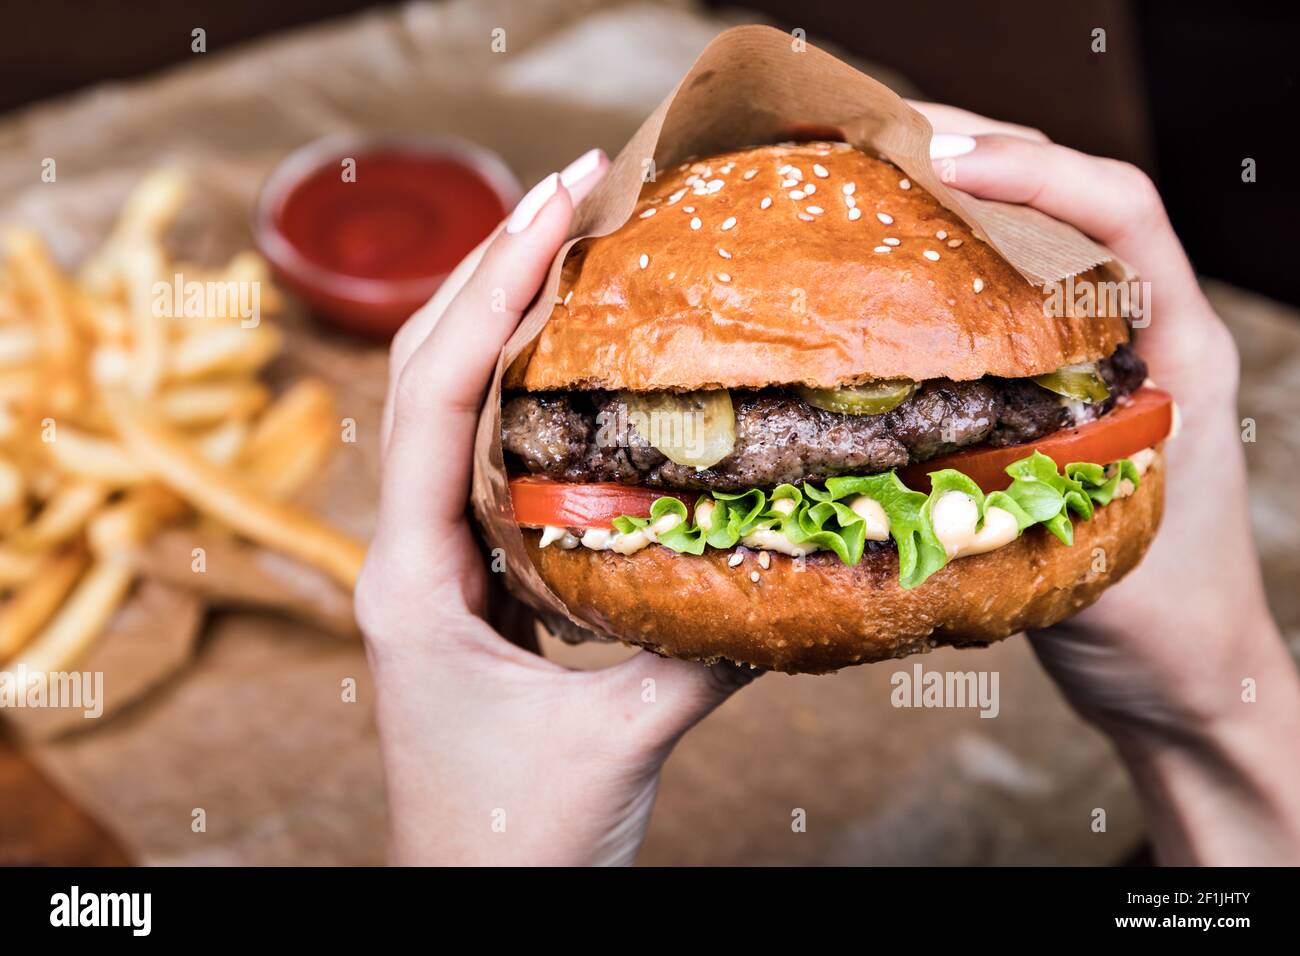 Burger on a wooden board Stock Photo